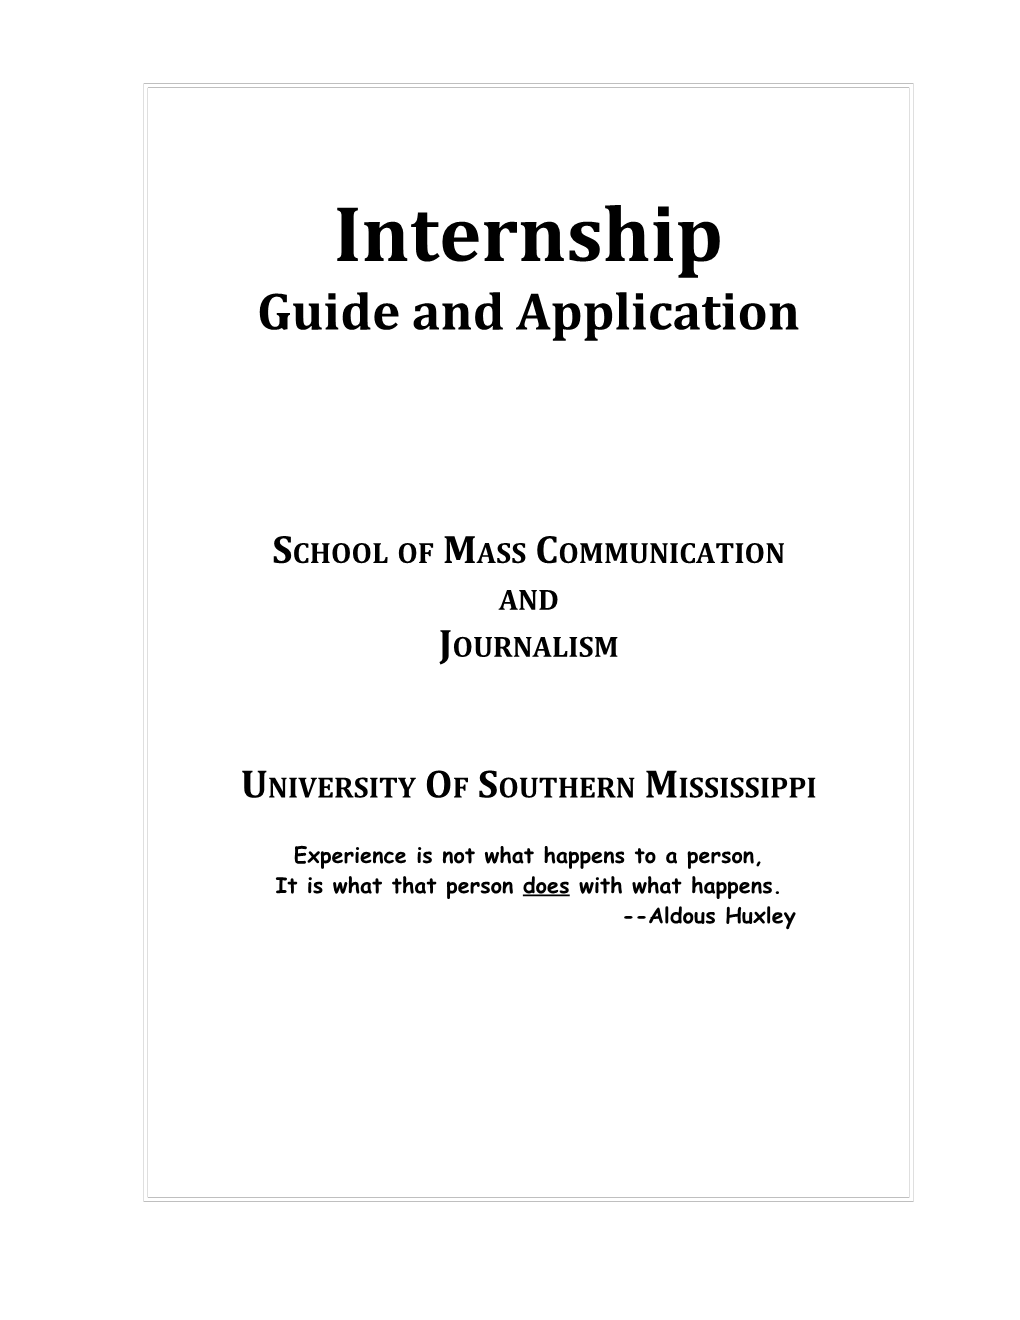 Internships Offer Students in the School of Mass Communication and Journalism an Important